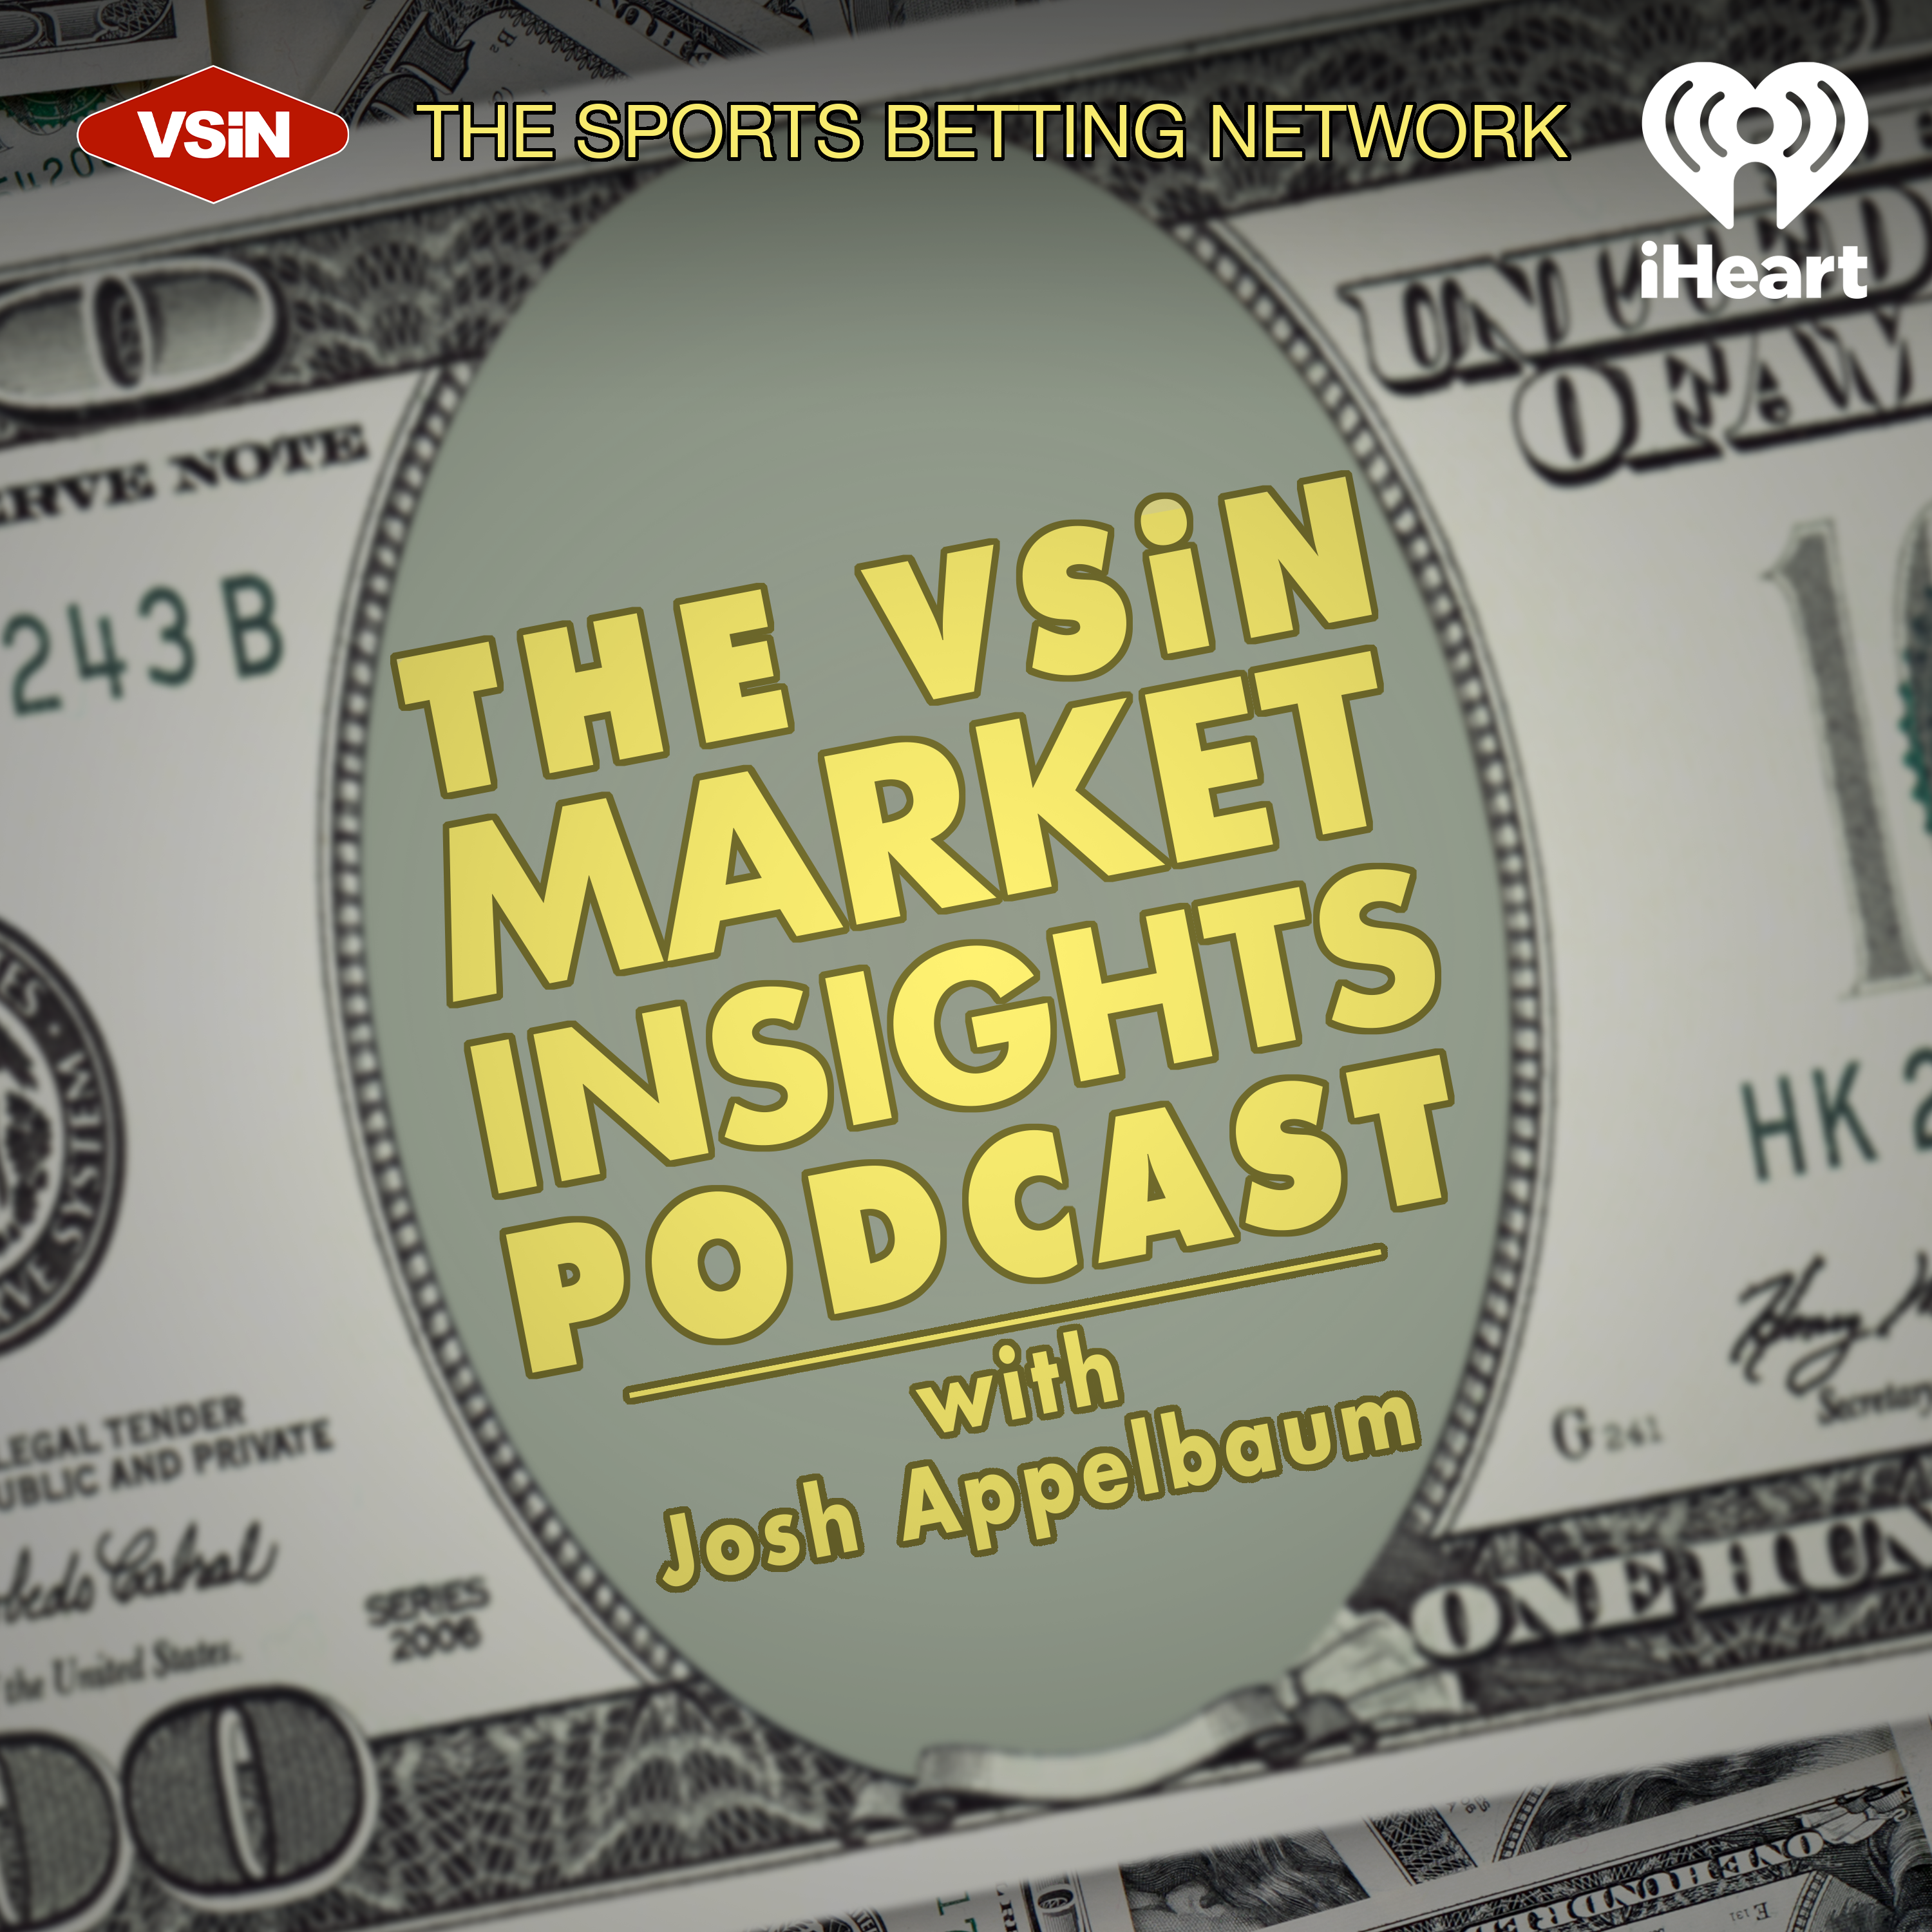 The VSiN Market Insights Podcast with Josh Appelbaum | April 11, 2022